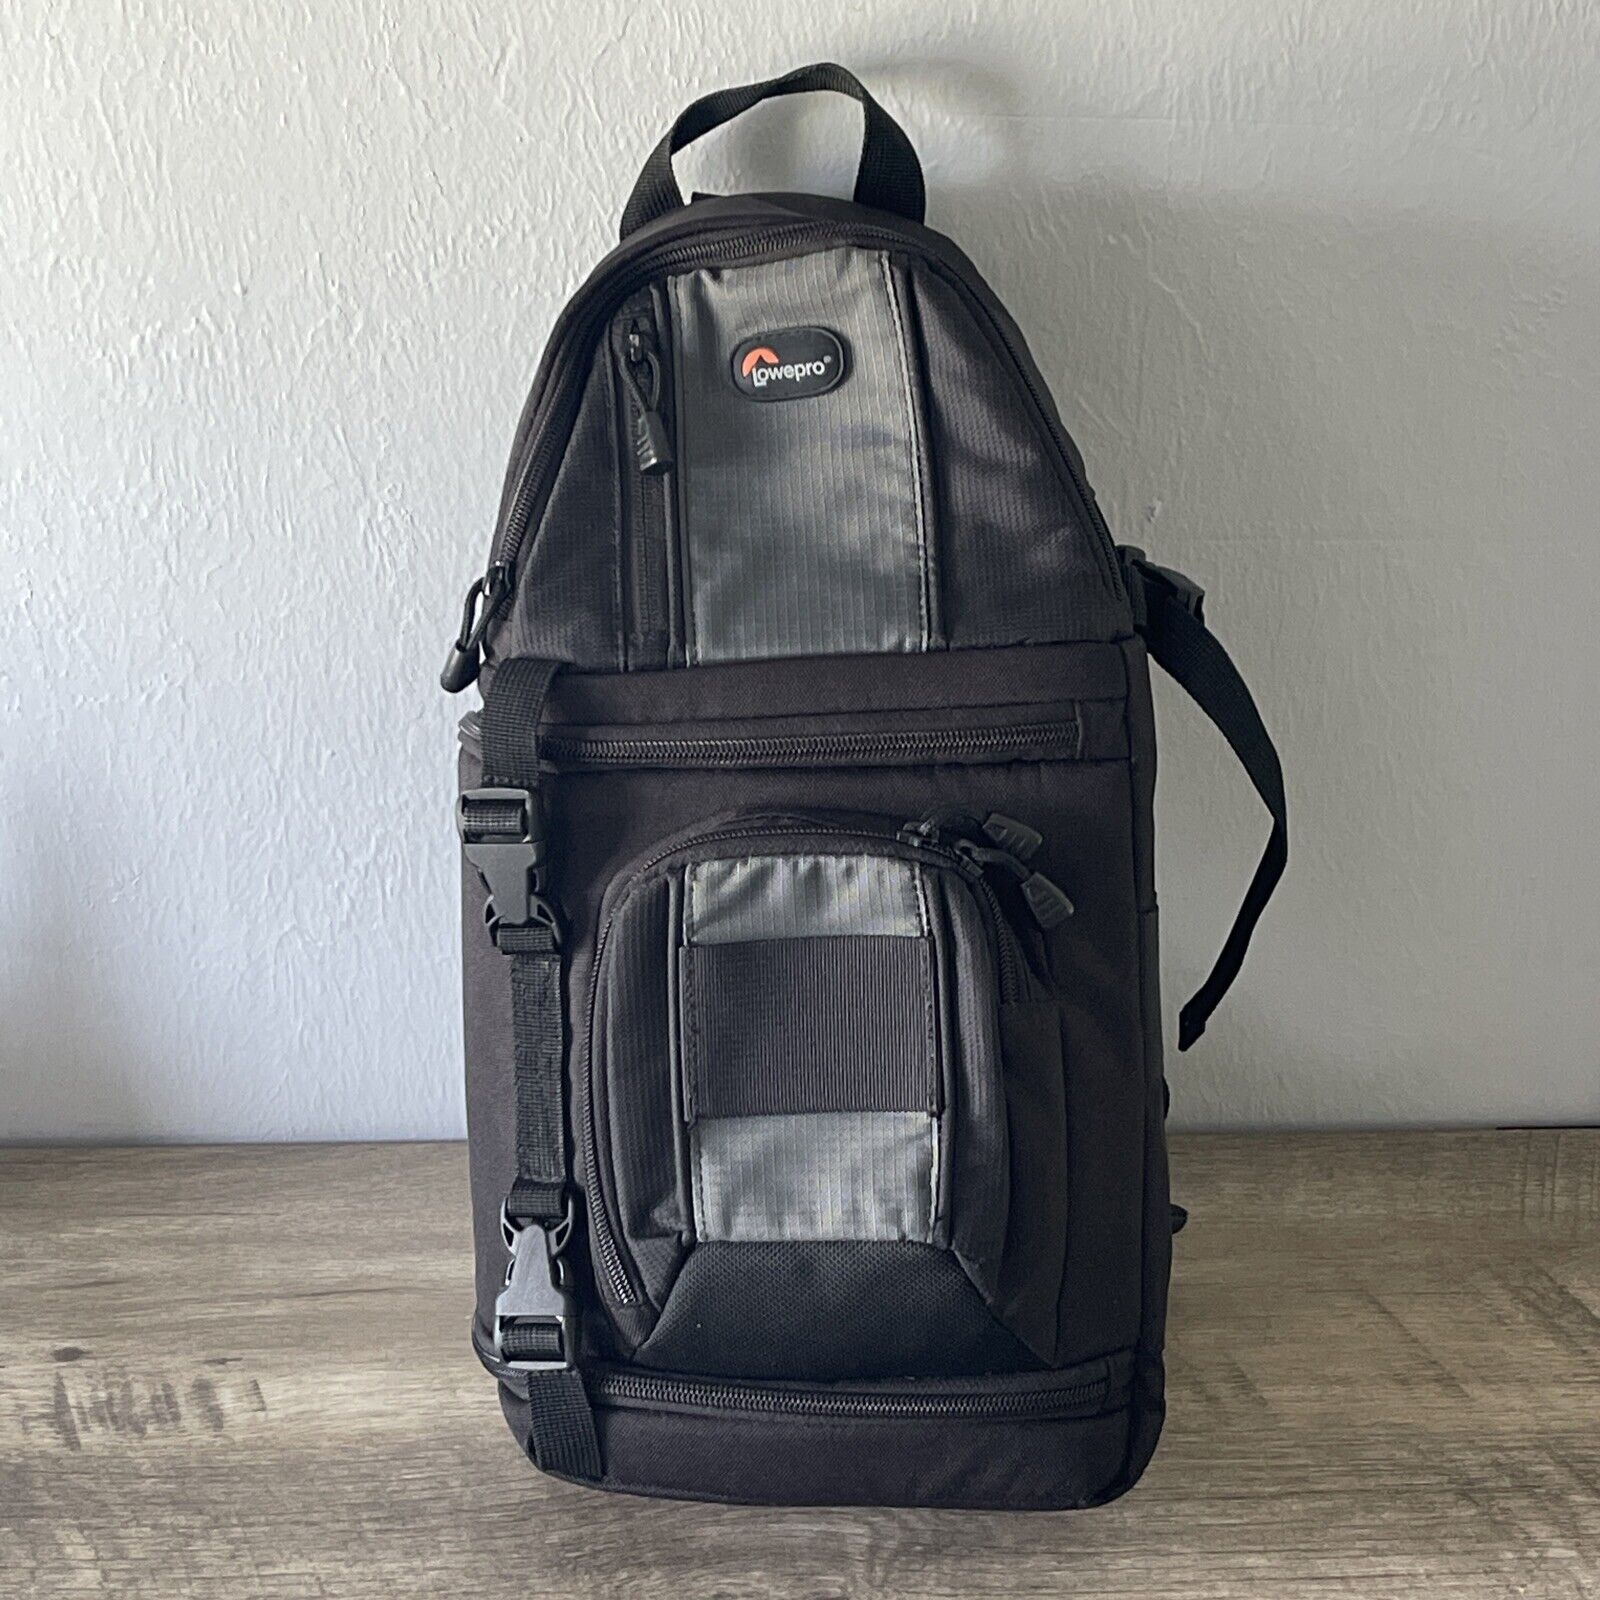 Drone Photography Backpack: Lowepro Slingshot 102 AW